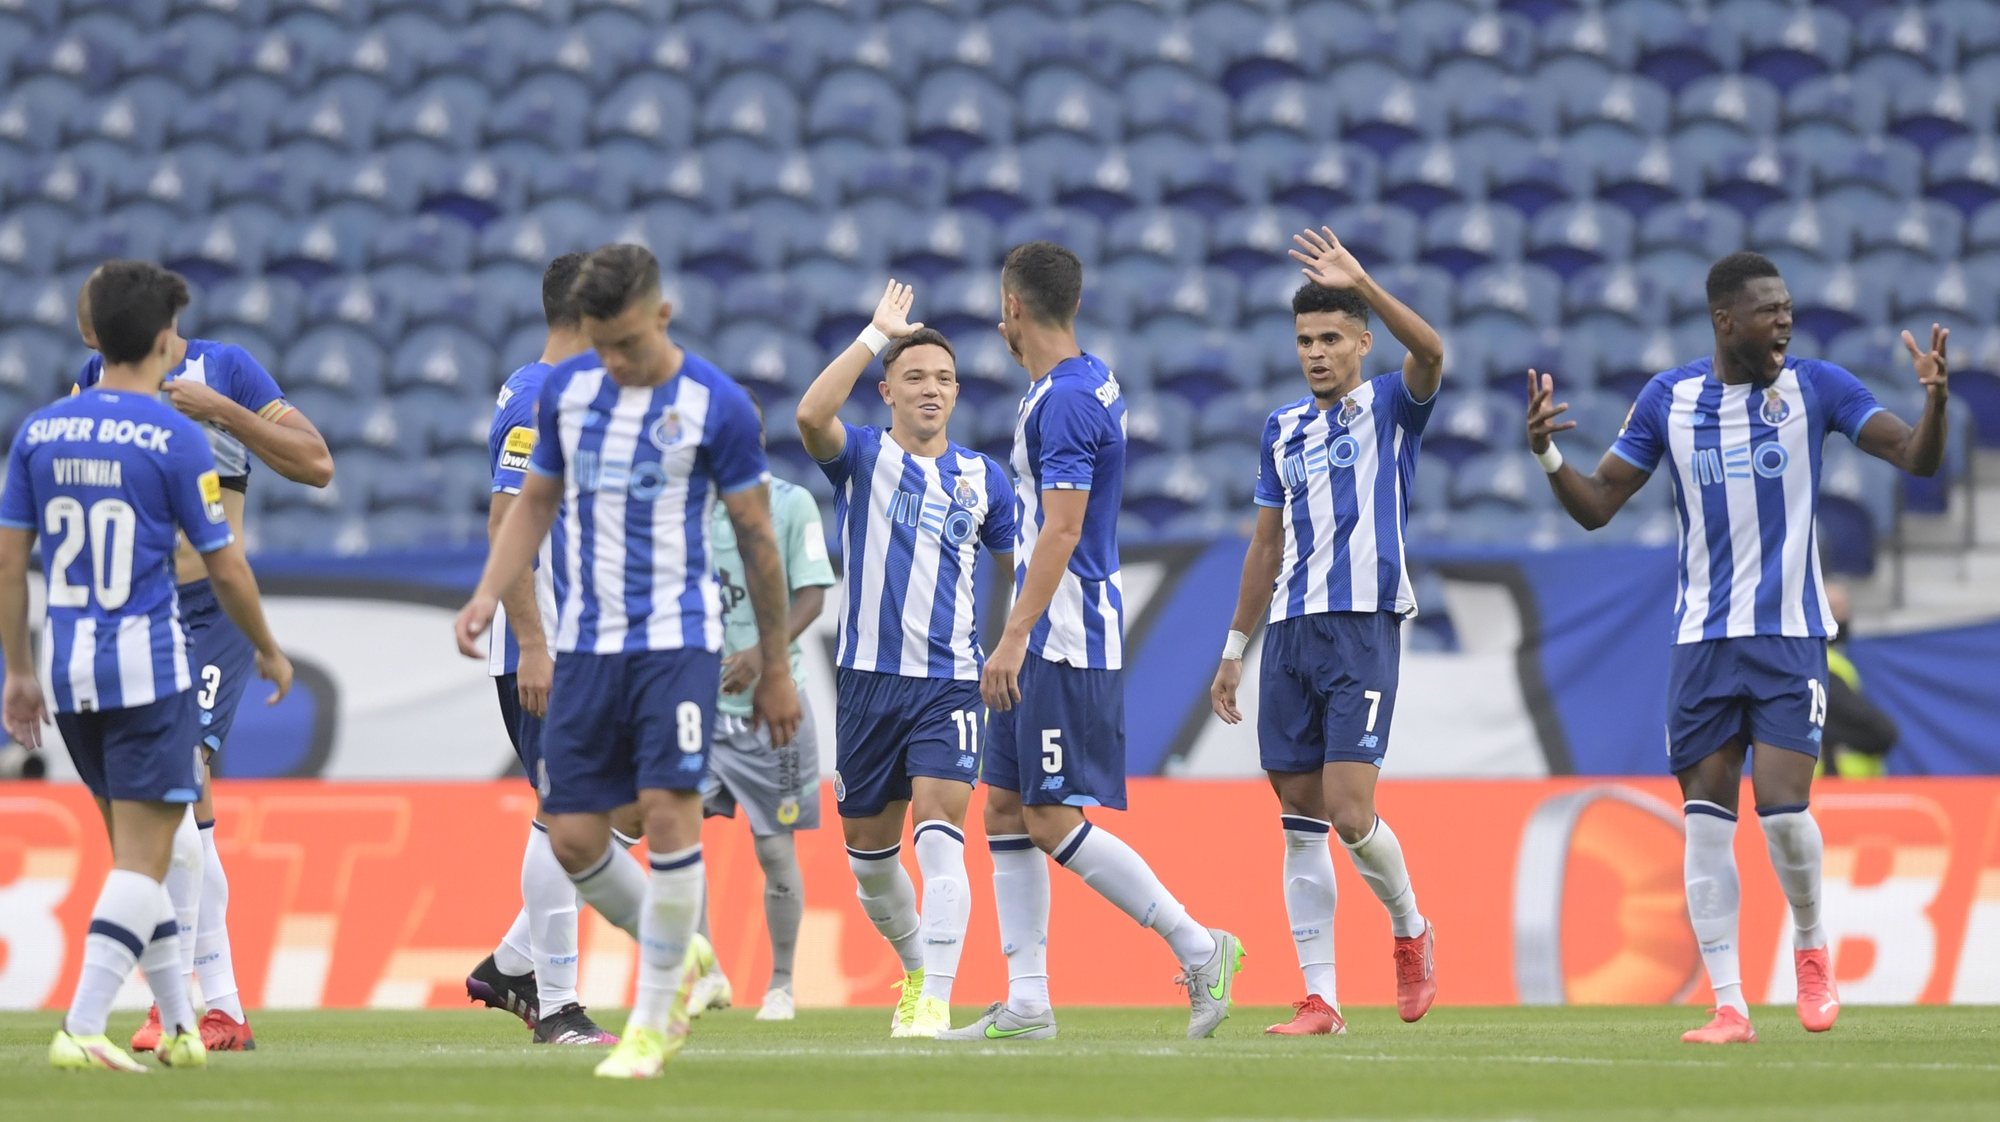 FC Porto&#039;s players celebrate a goal scored to Arouca, during their Portuguese First League soccer match held at Dragao stadium in Porto, northwest of Portugal, 28 august 2021. FERNANDO VELUDO/LUSA